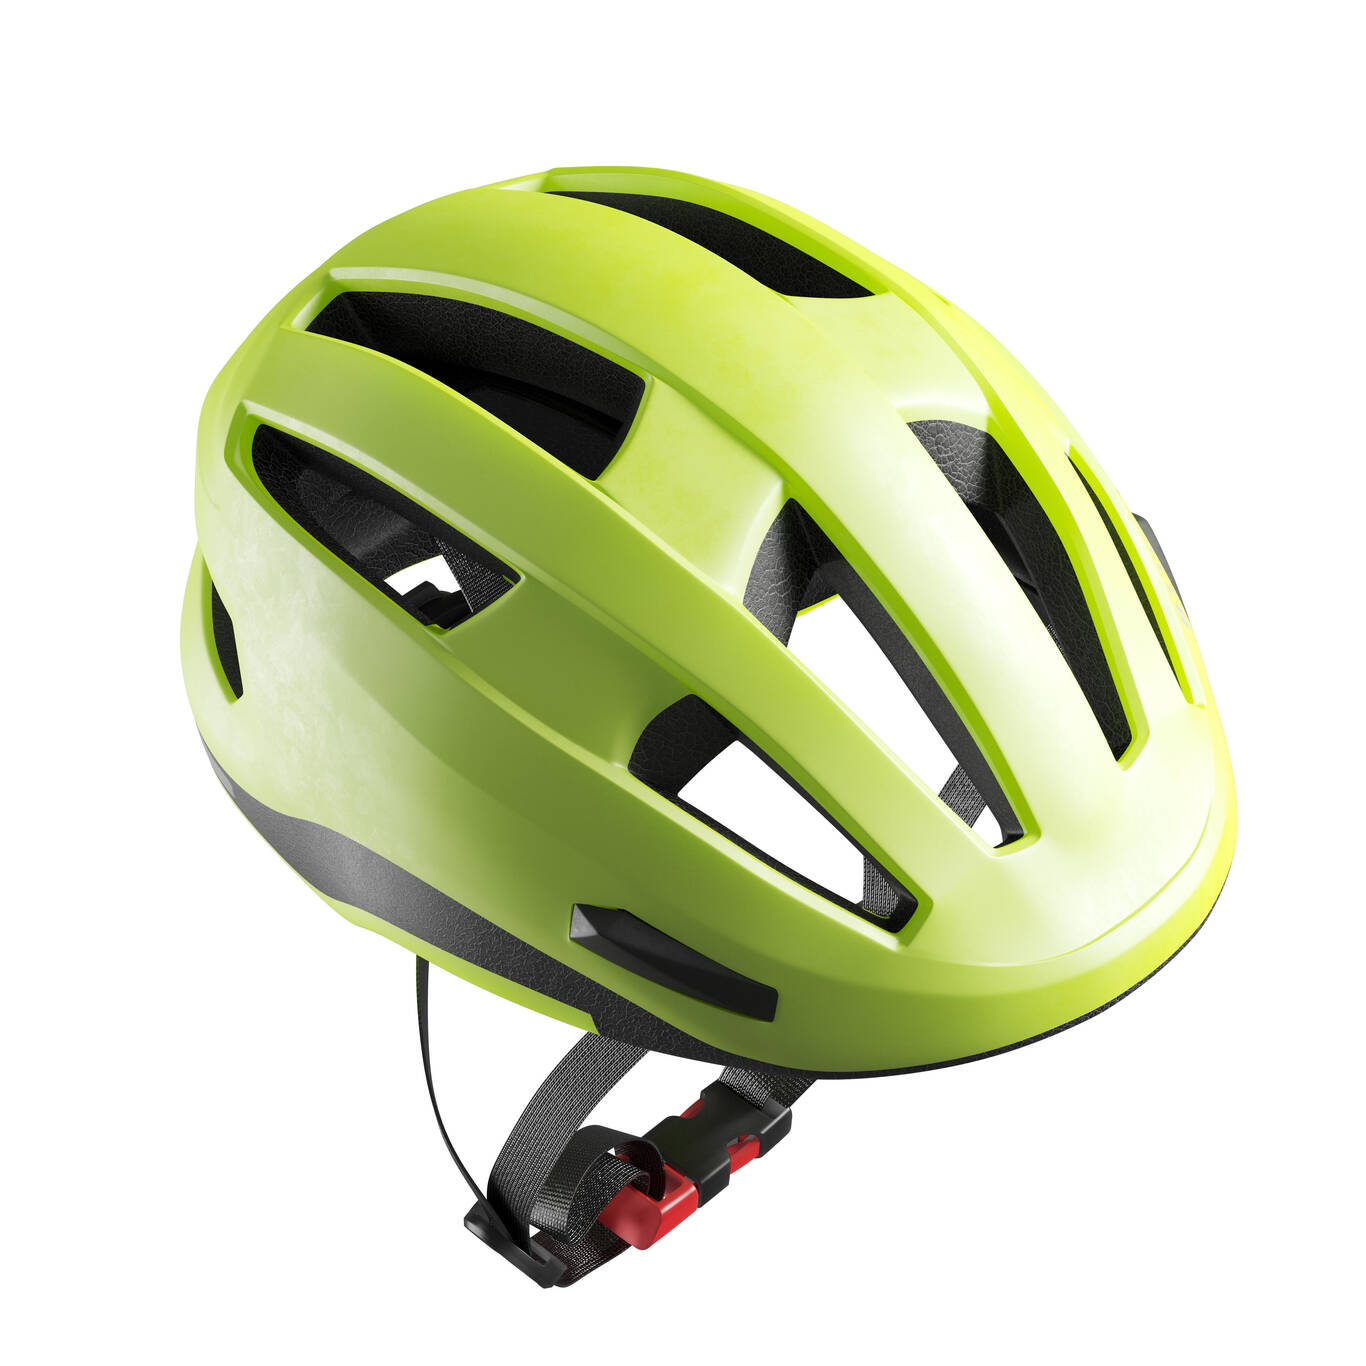 Helm City Cycling 500 - Neon Yellow